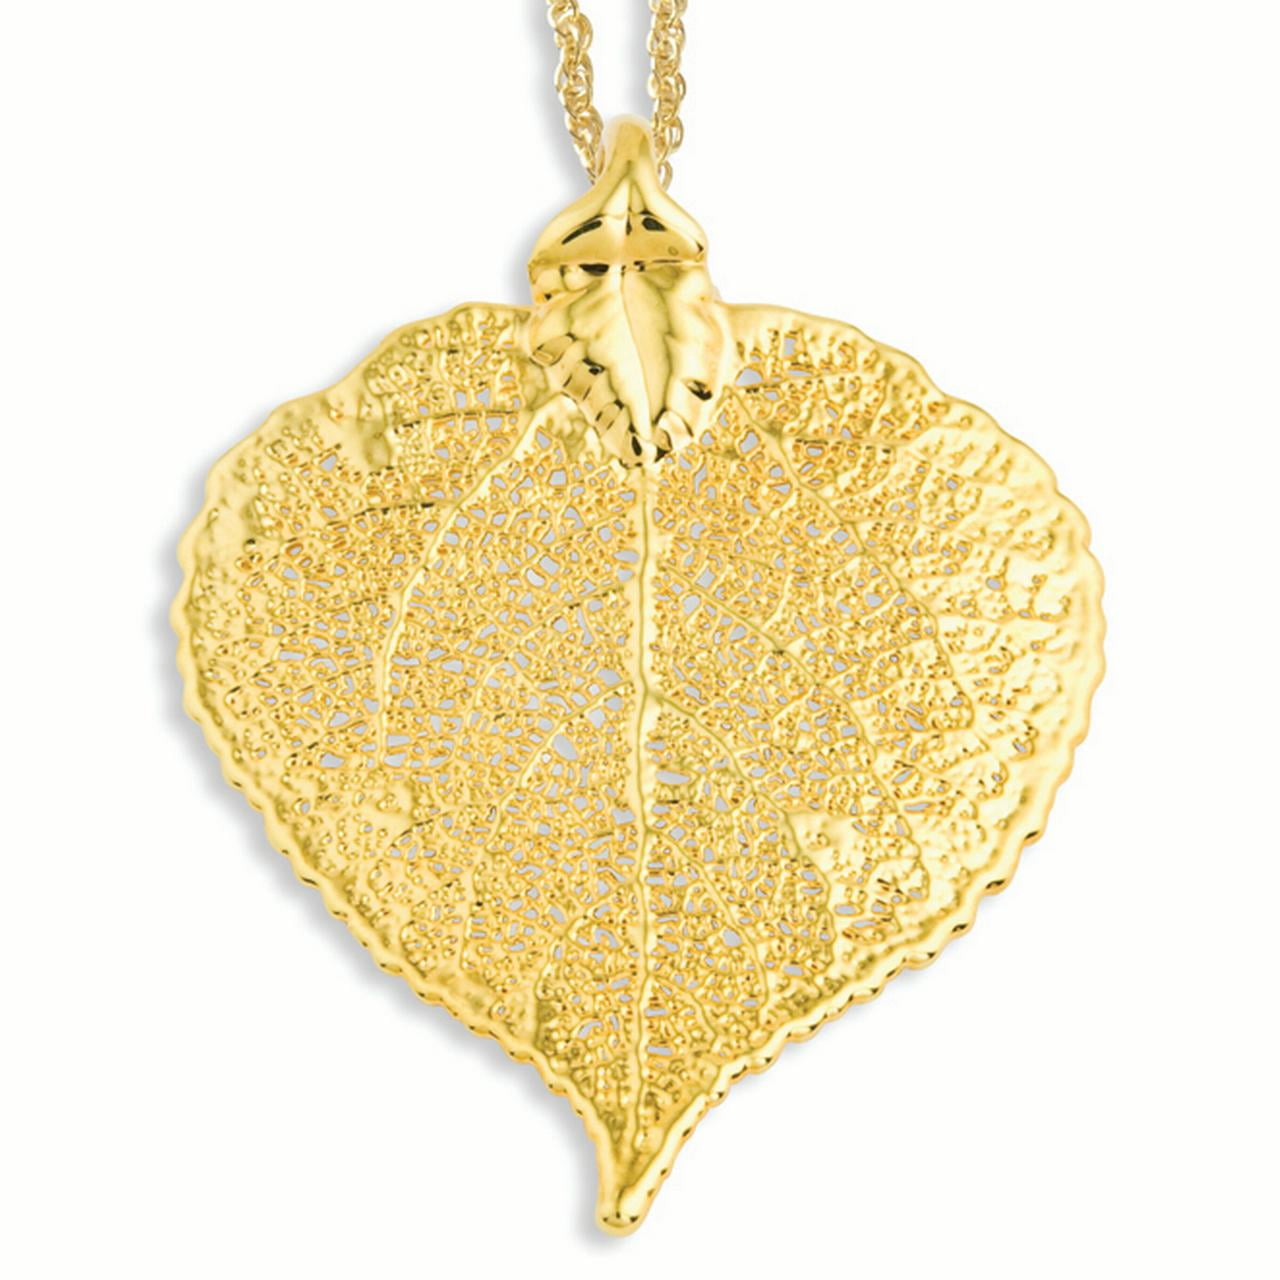 Comes Gift Boxed Aspen Real Leaf Ornaments Dipped in 24k Gold 